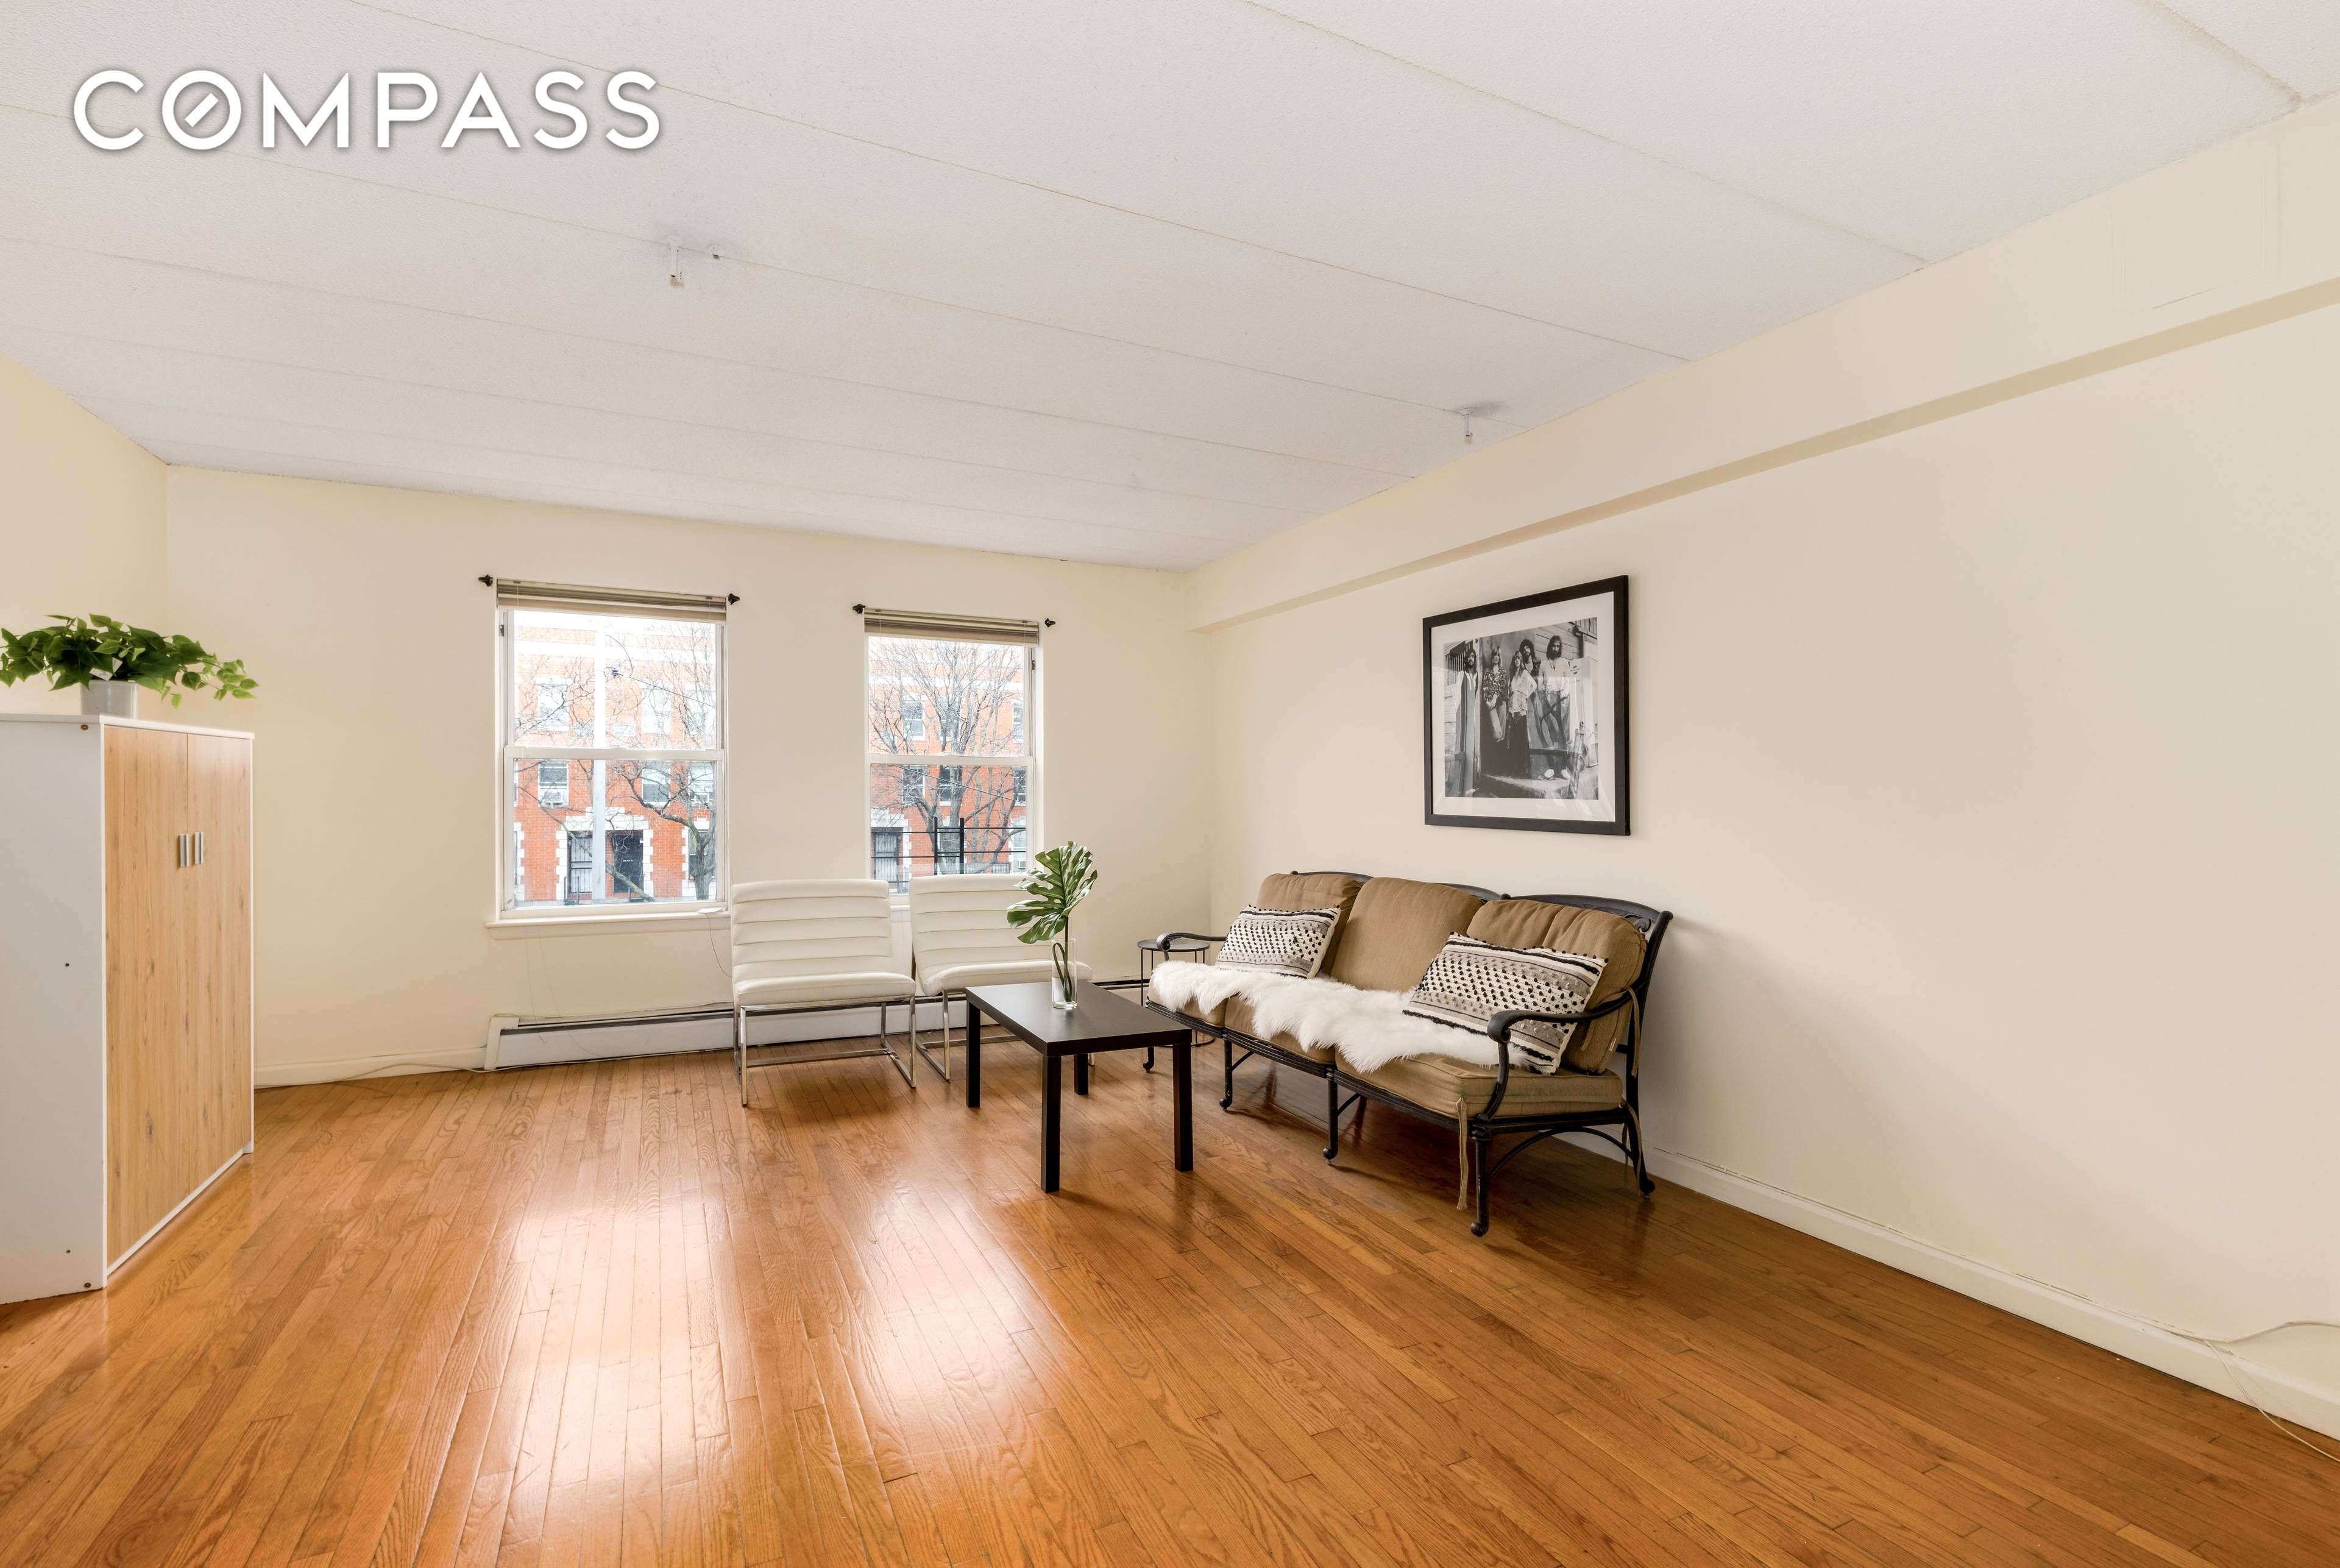 Move right into this spacious and bright two bedroom, one and a half bathroom duplex featuring updated interiors and a desirable Central Harlem location.